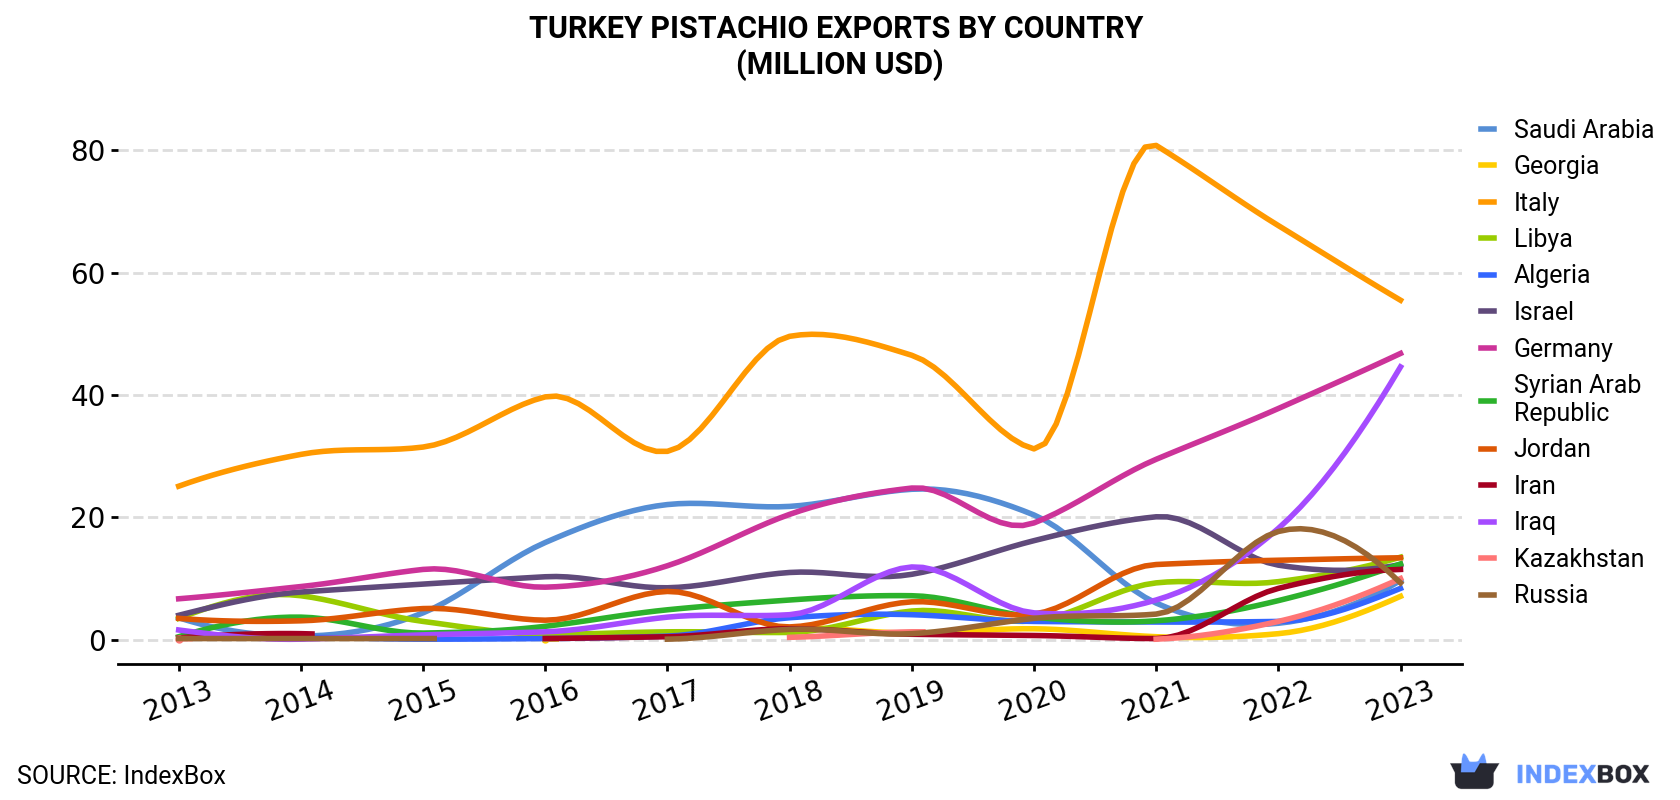 Turkey Pistachio Exports By Country (Million USD)